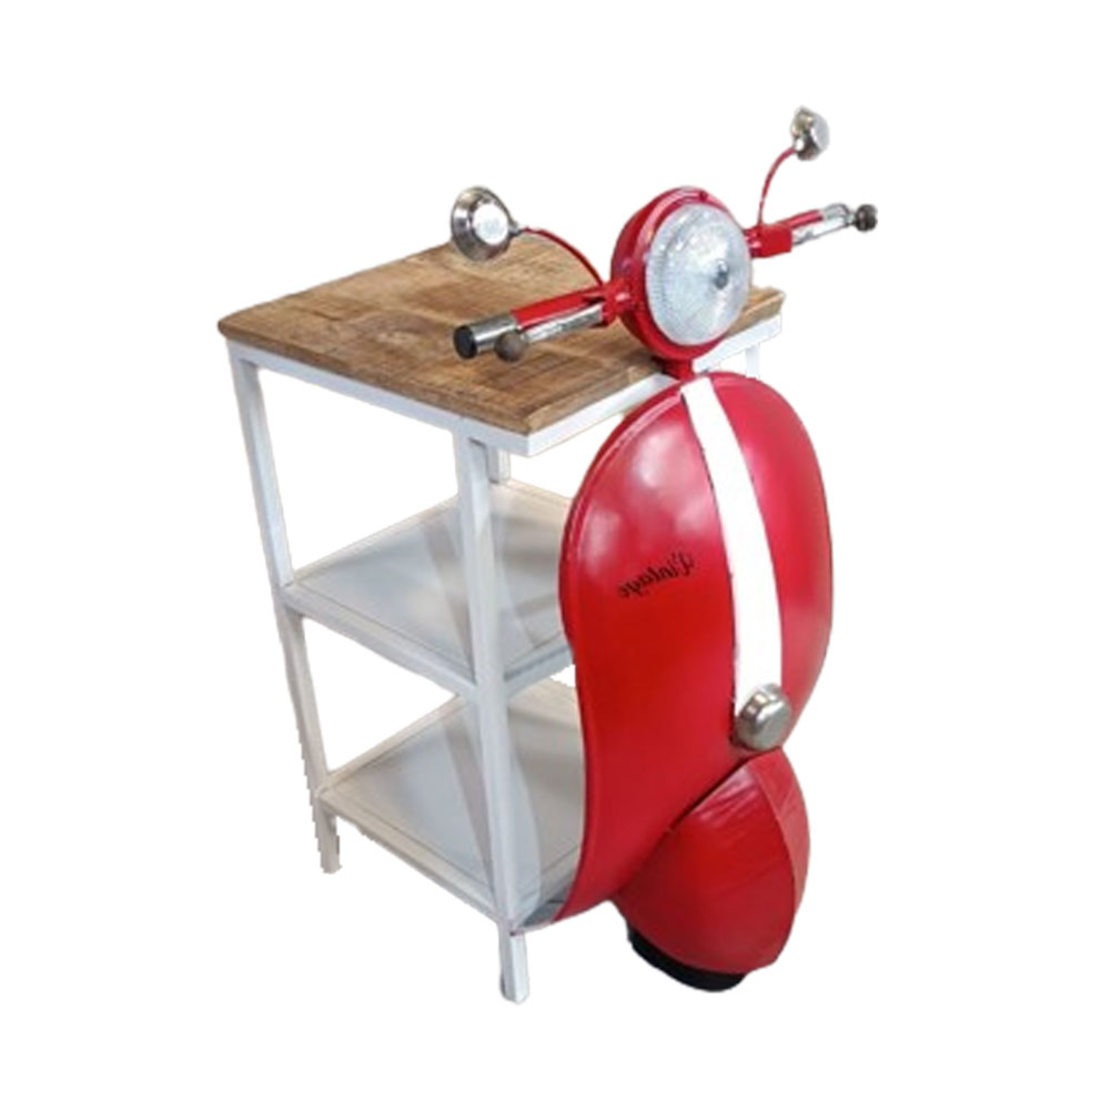 MINI VESPA SIDE TABLE WITH SHELVES METAL RED WHITE